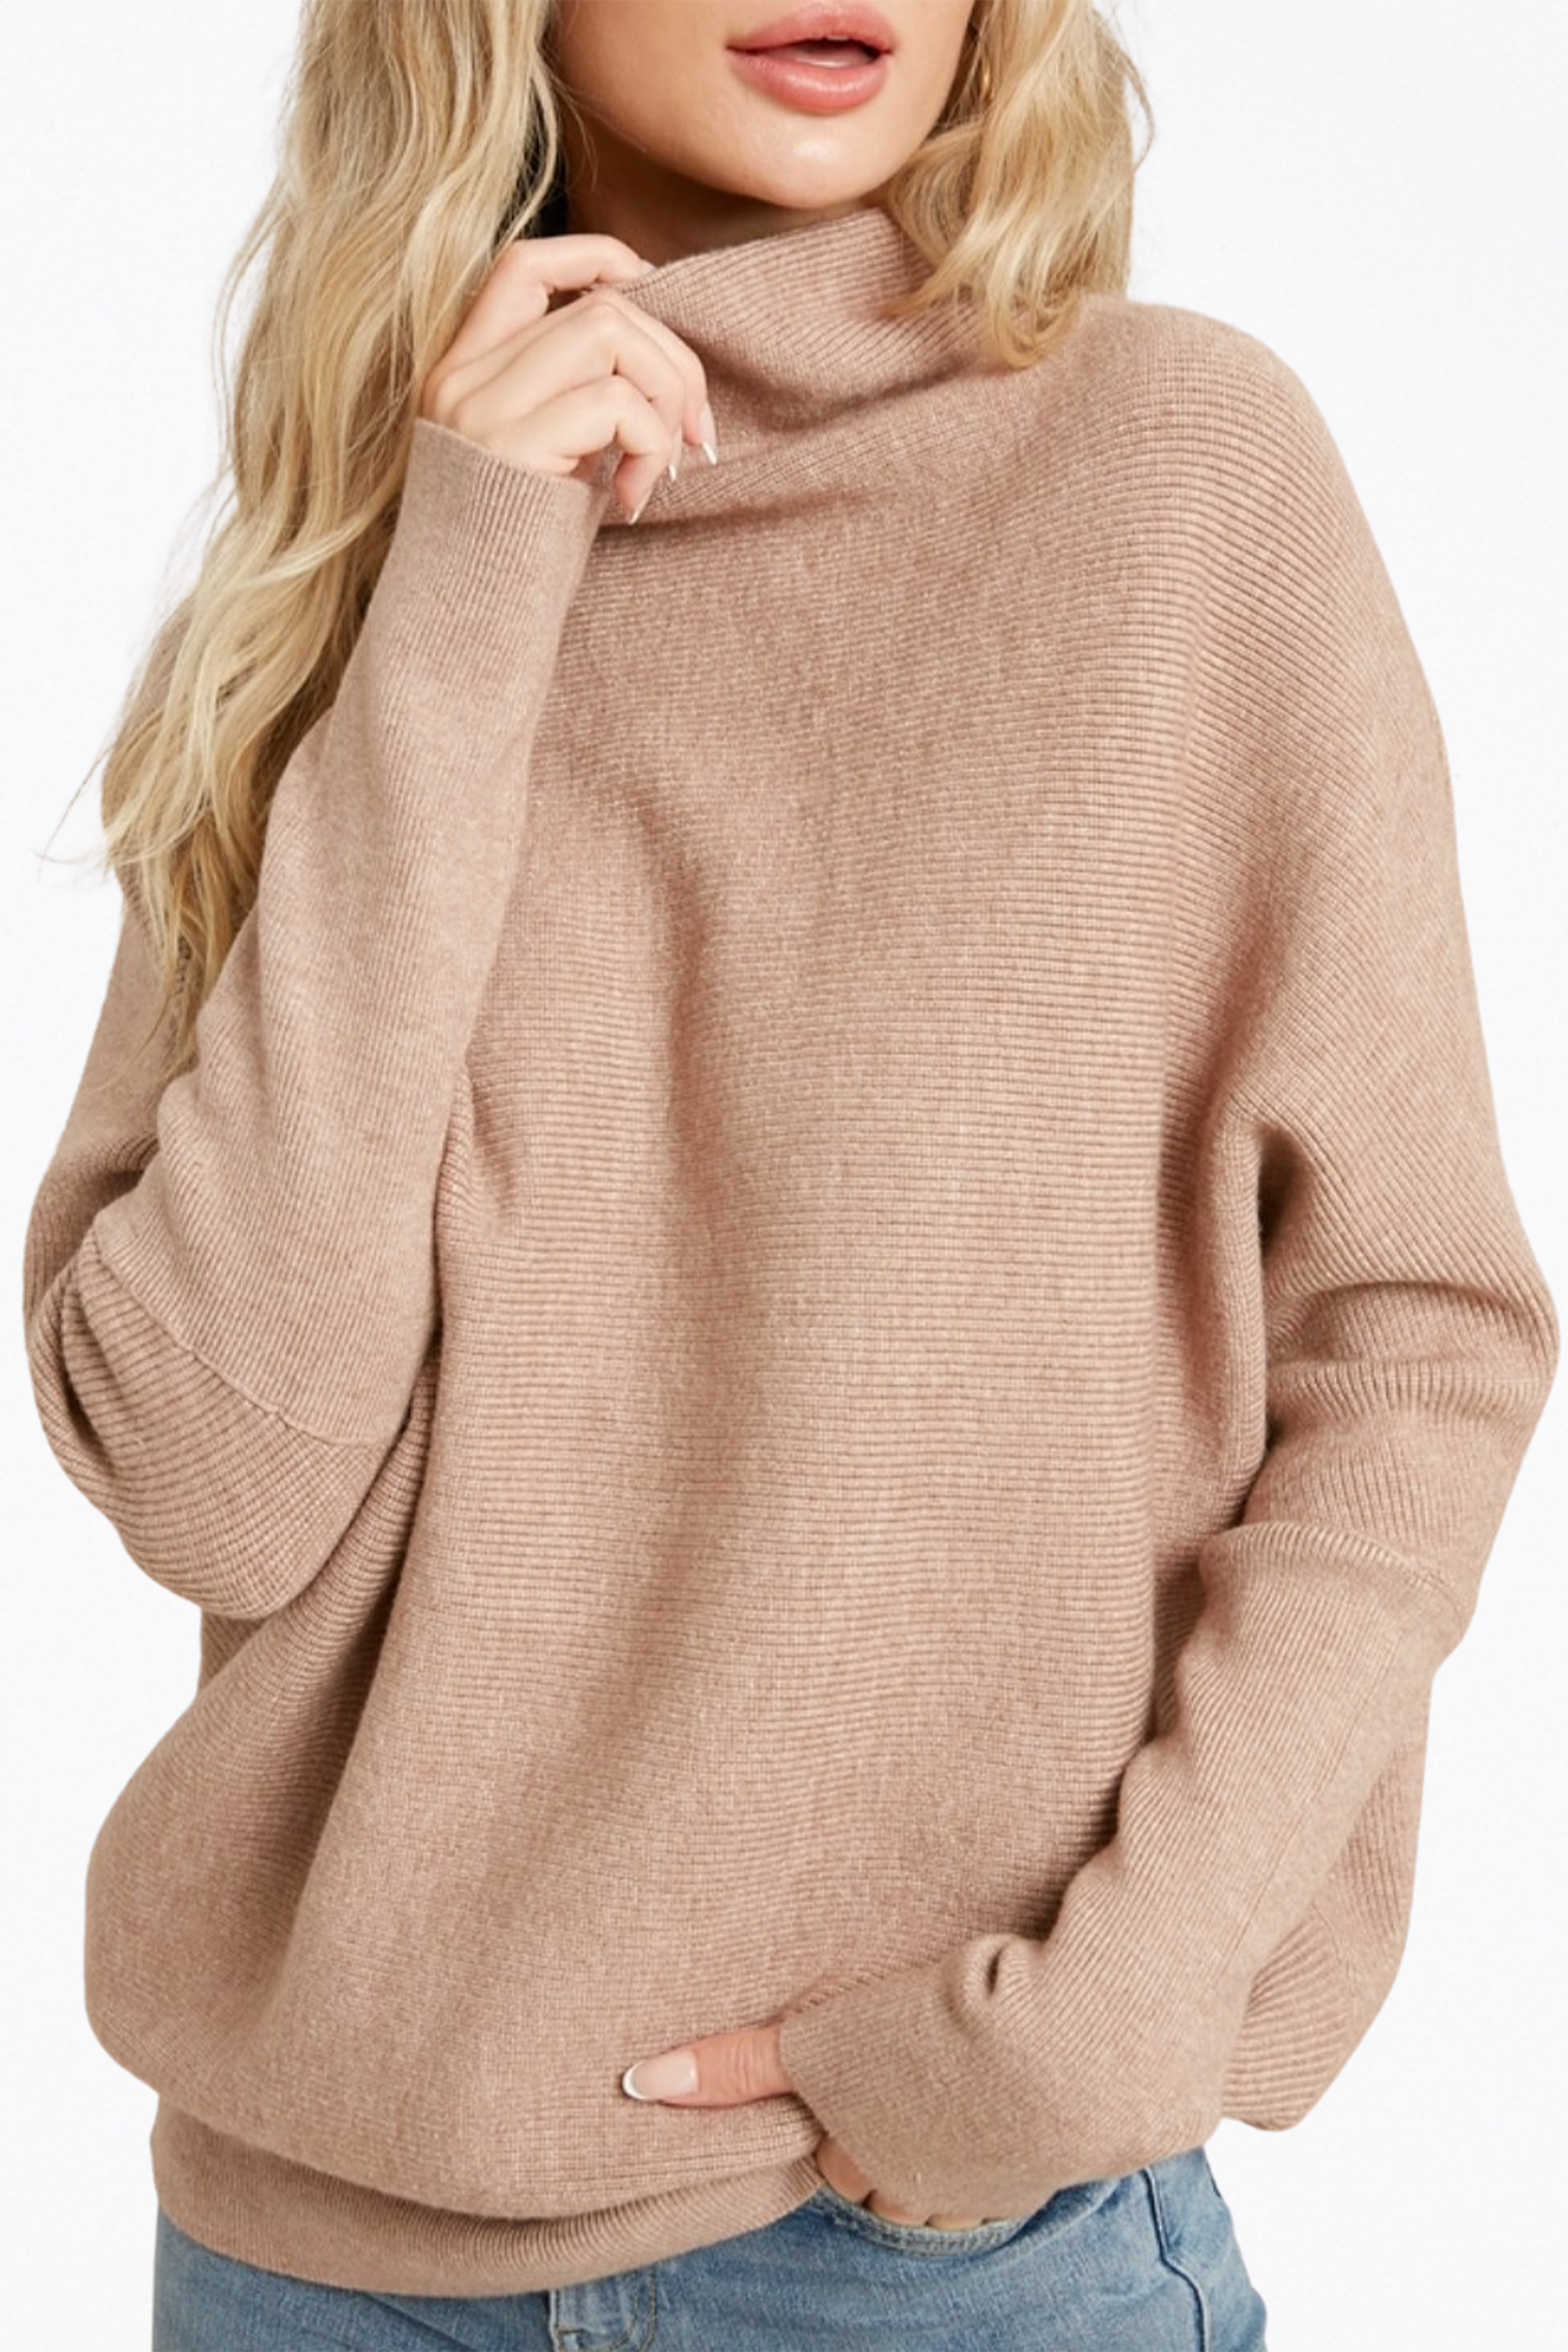 Lush Far Away Ivory Ribbed Knit Slouchy Sweater